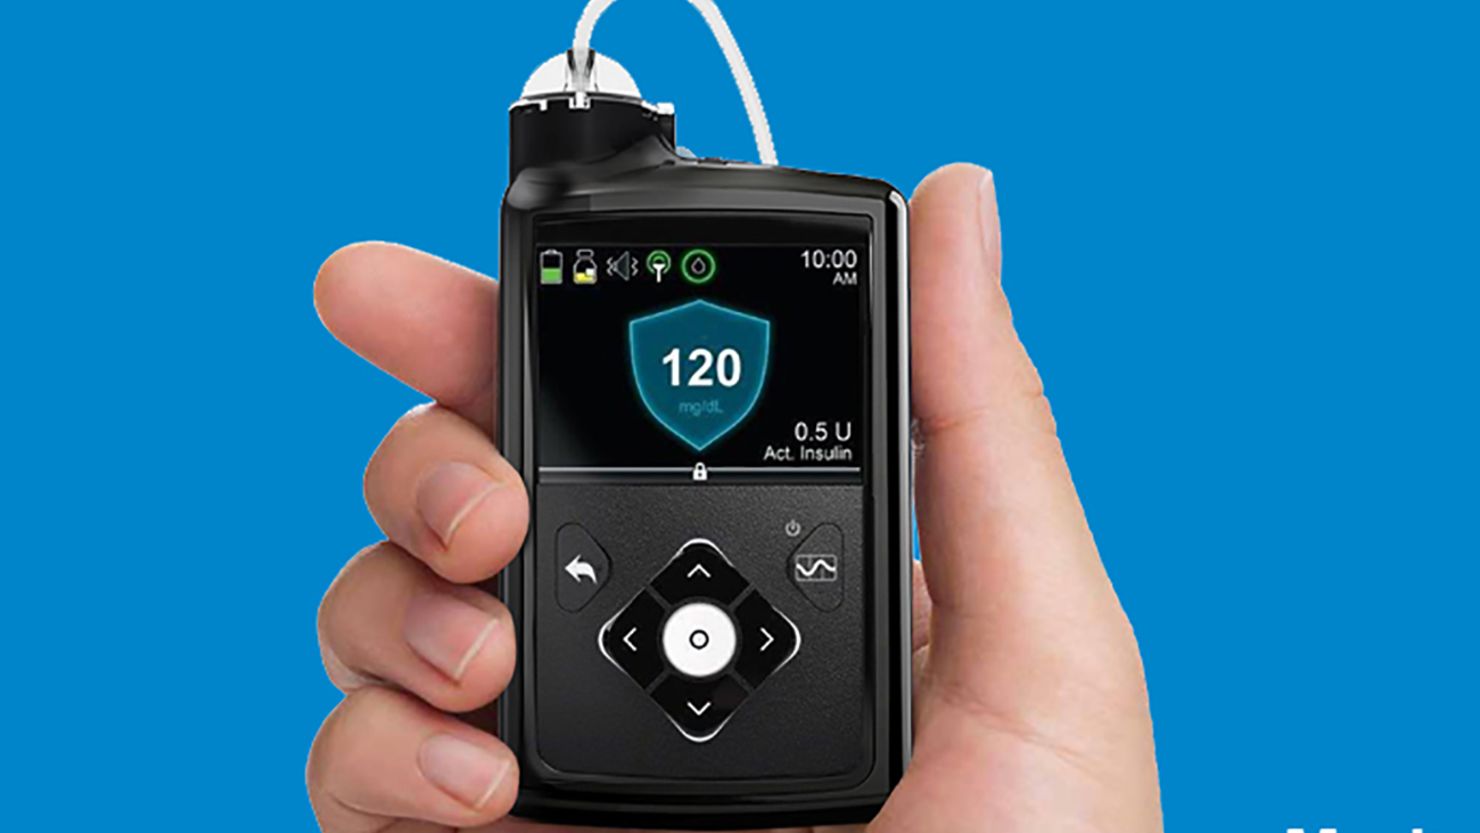 Medtronic recalls certain MiniMed insulin pumps tied to 1 death